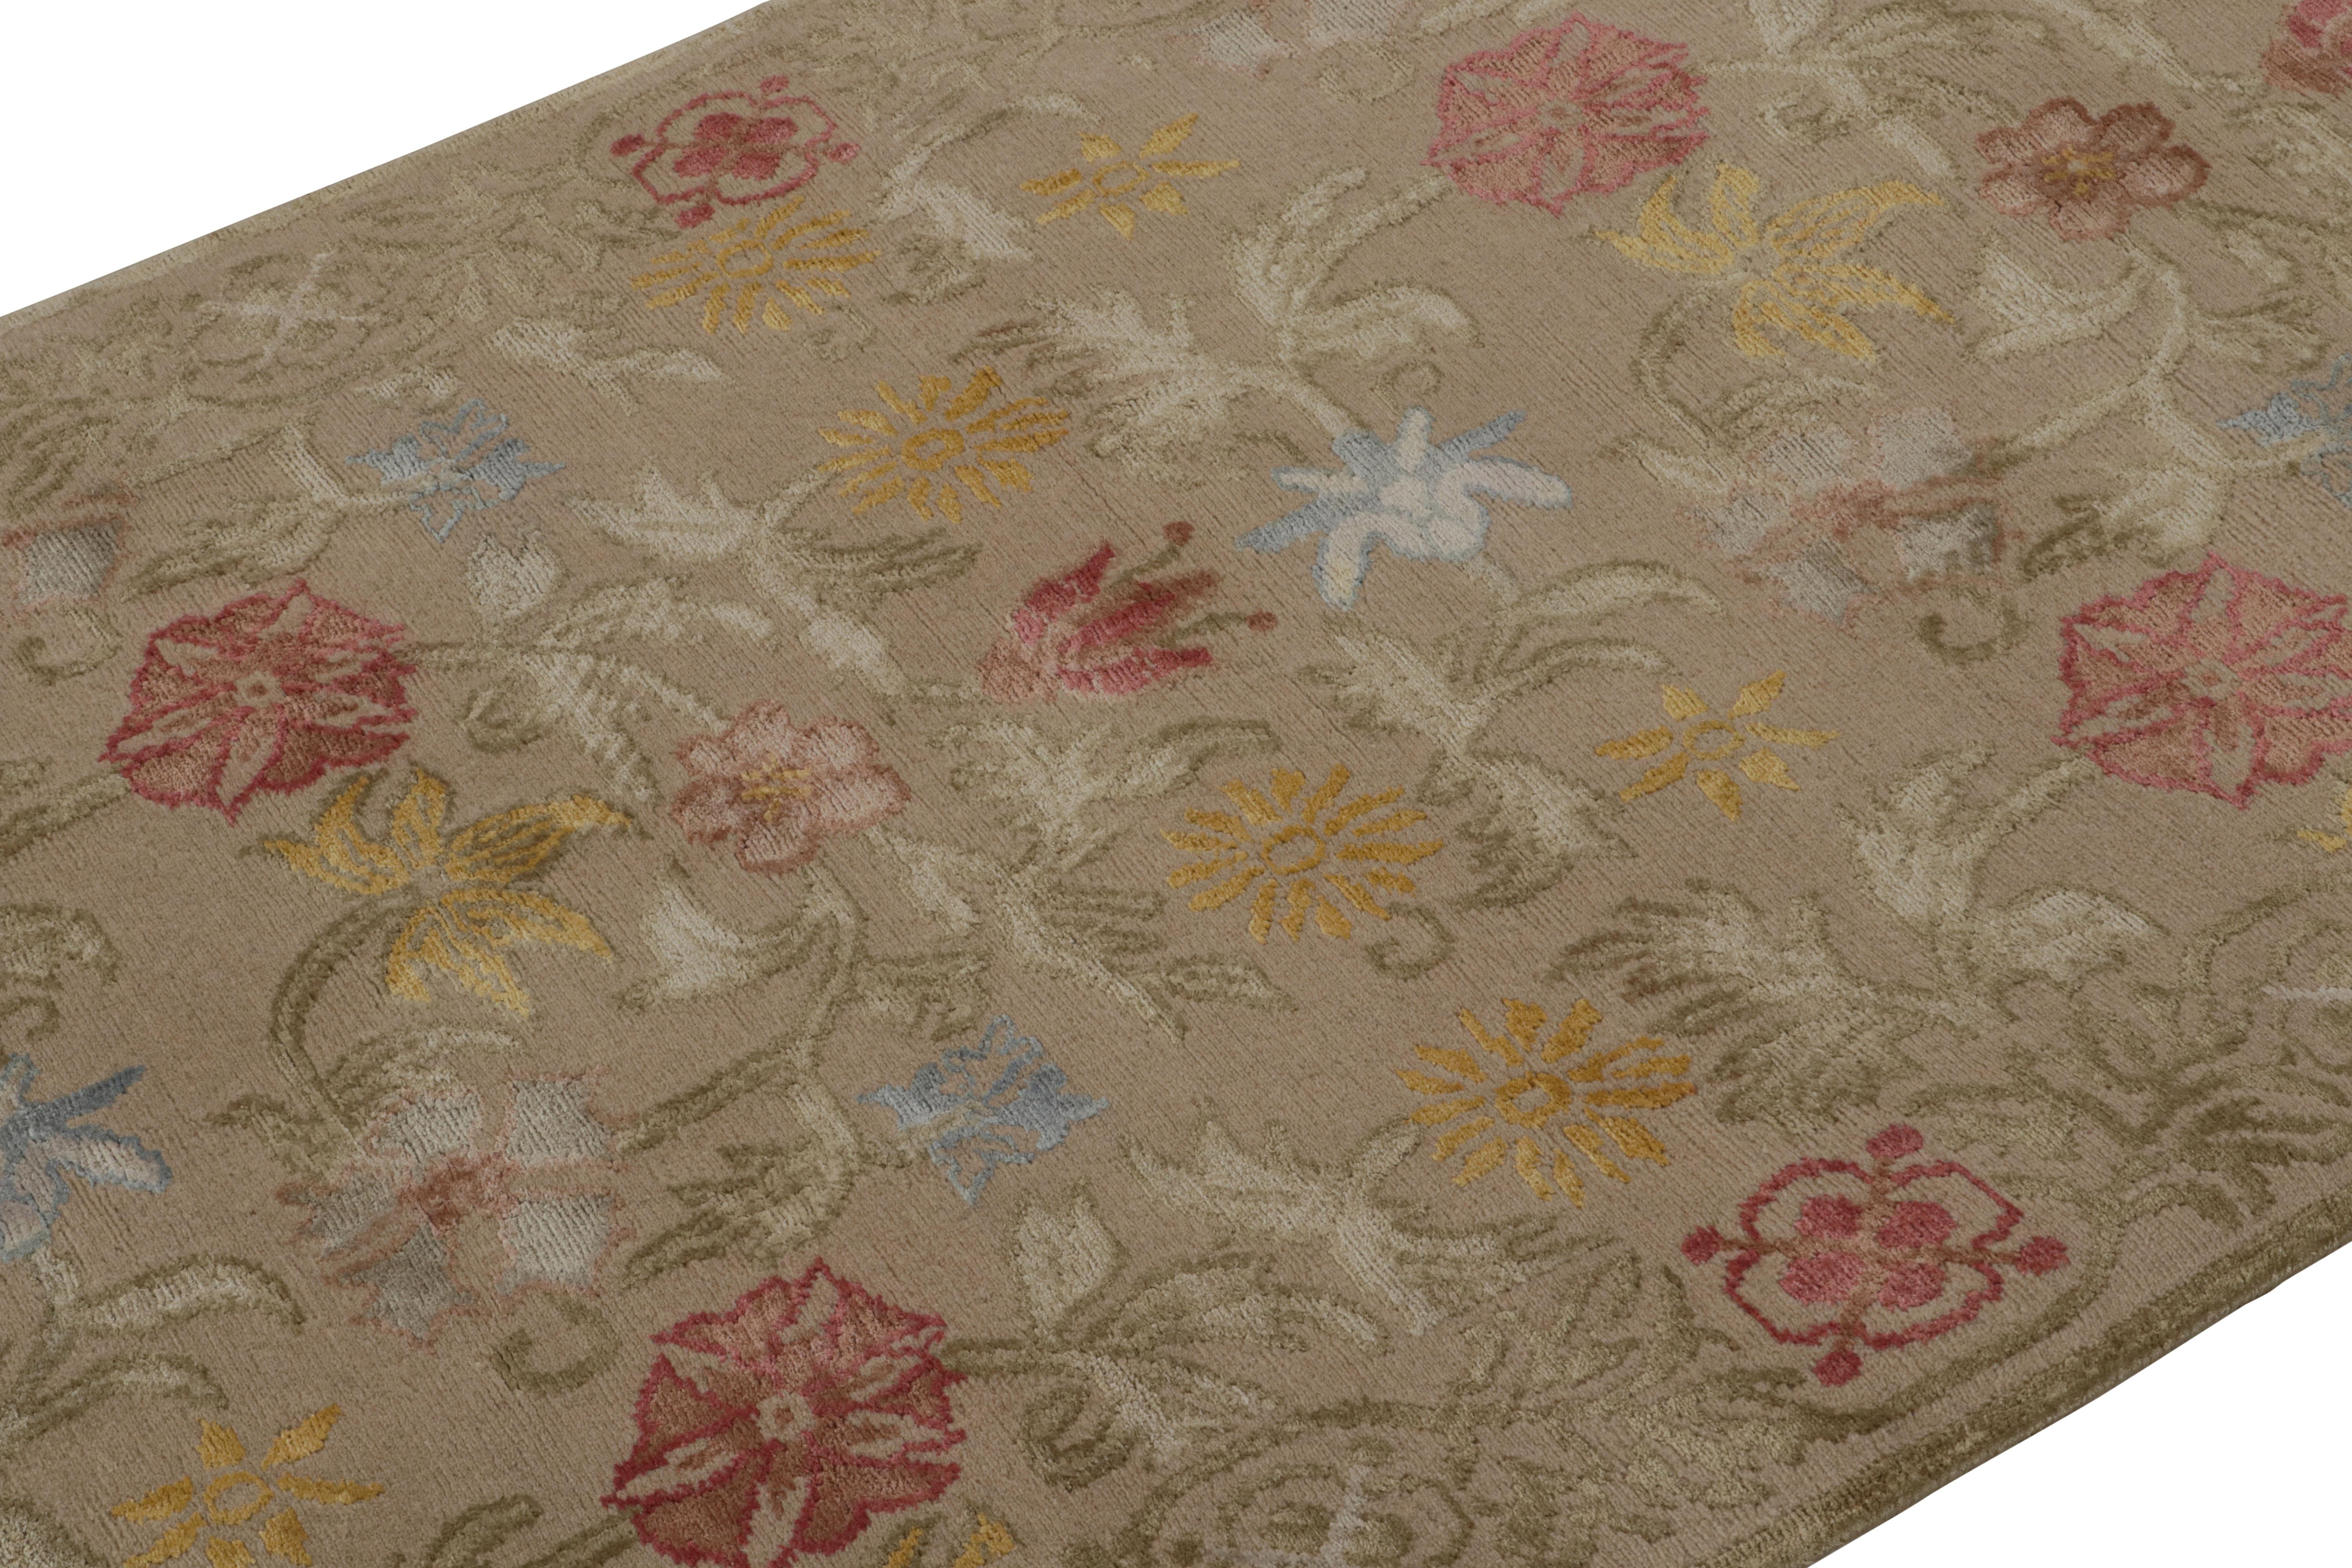 Nepalese Rug & Kilim’s Spanish European Style Rug in Beige with Floral Patterns “Bilbao” For Sale